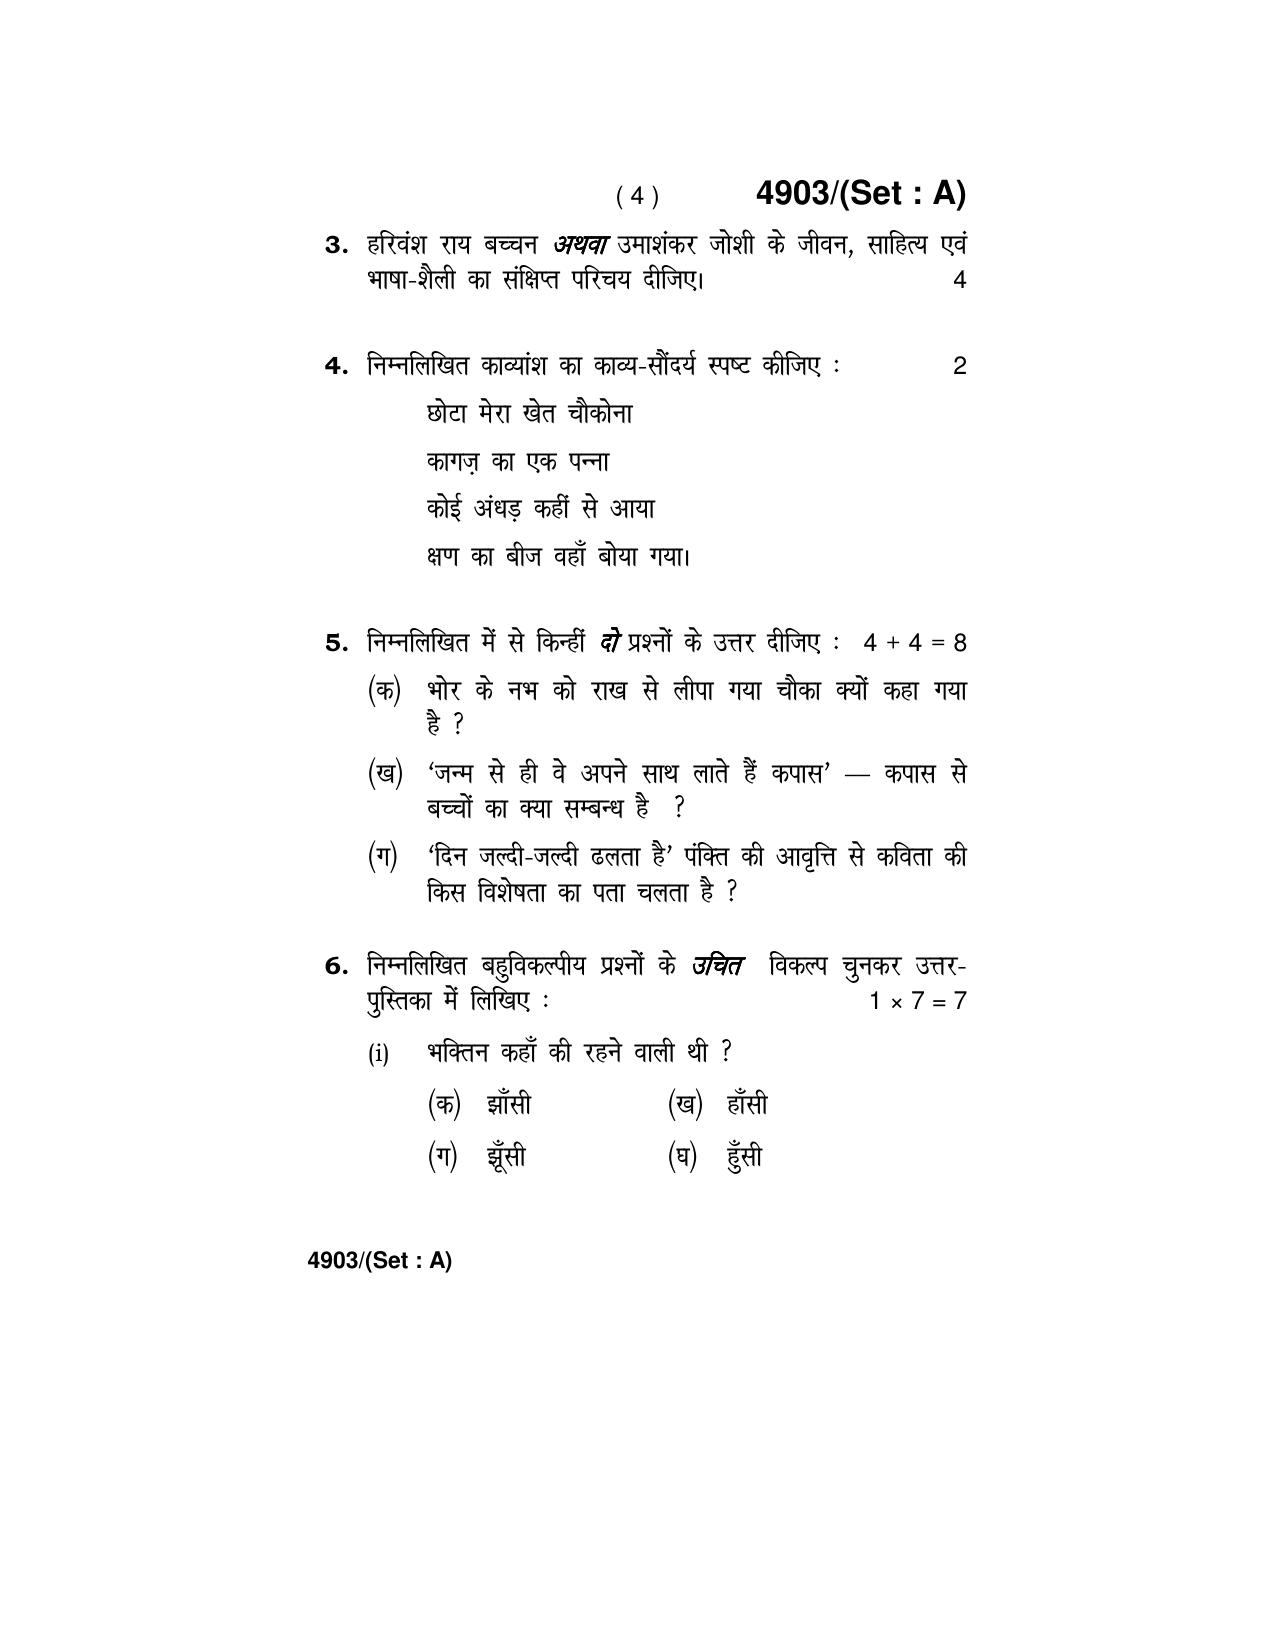 Haryana Board HBSE Class 12 Hindi Core 2020 Question Paper - Page 4